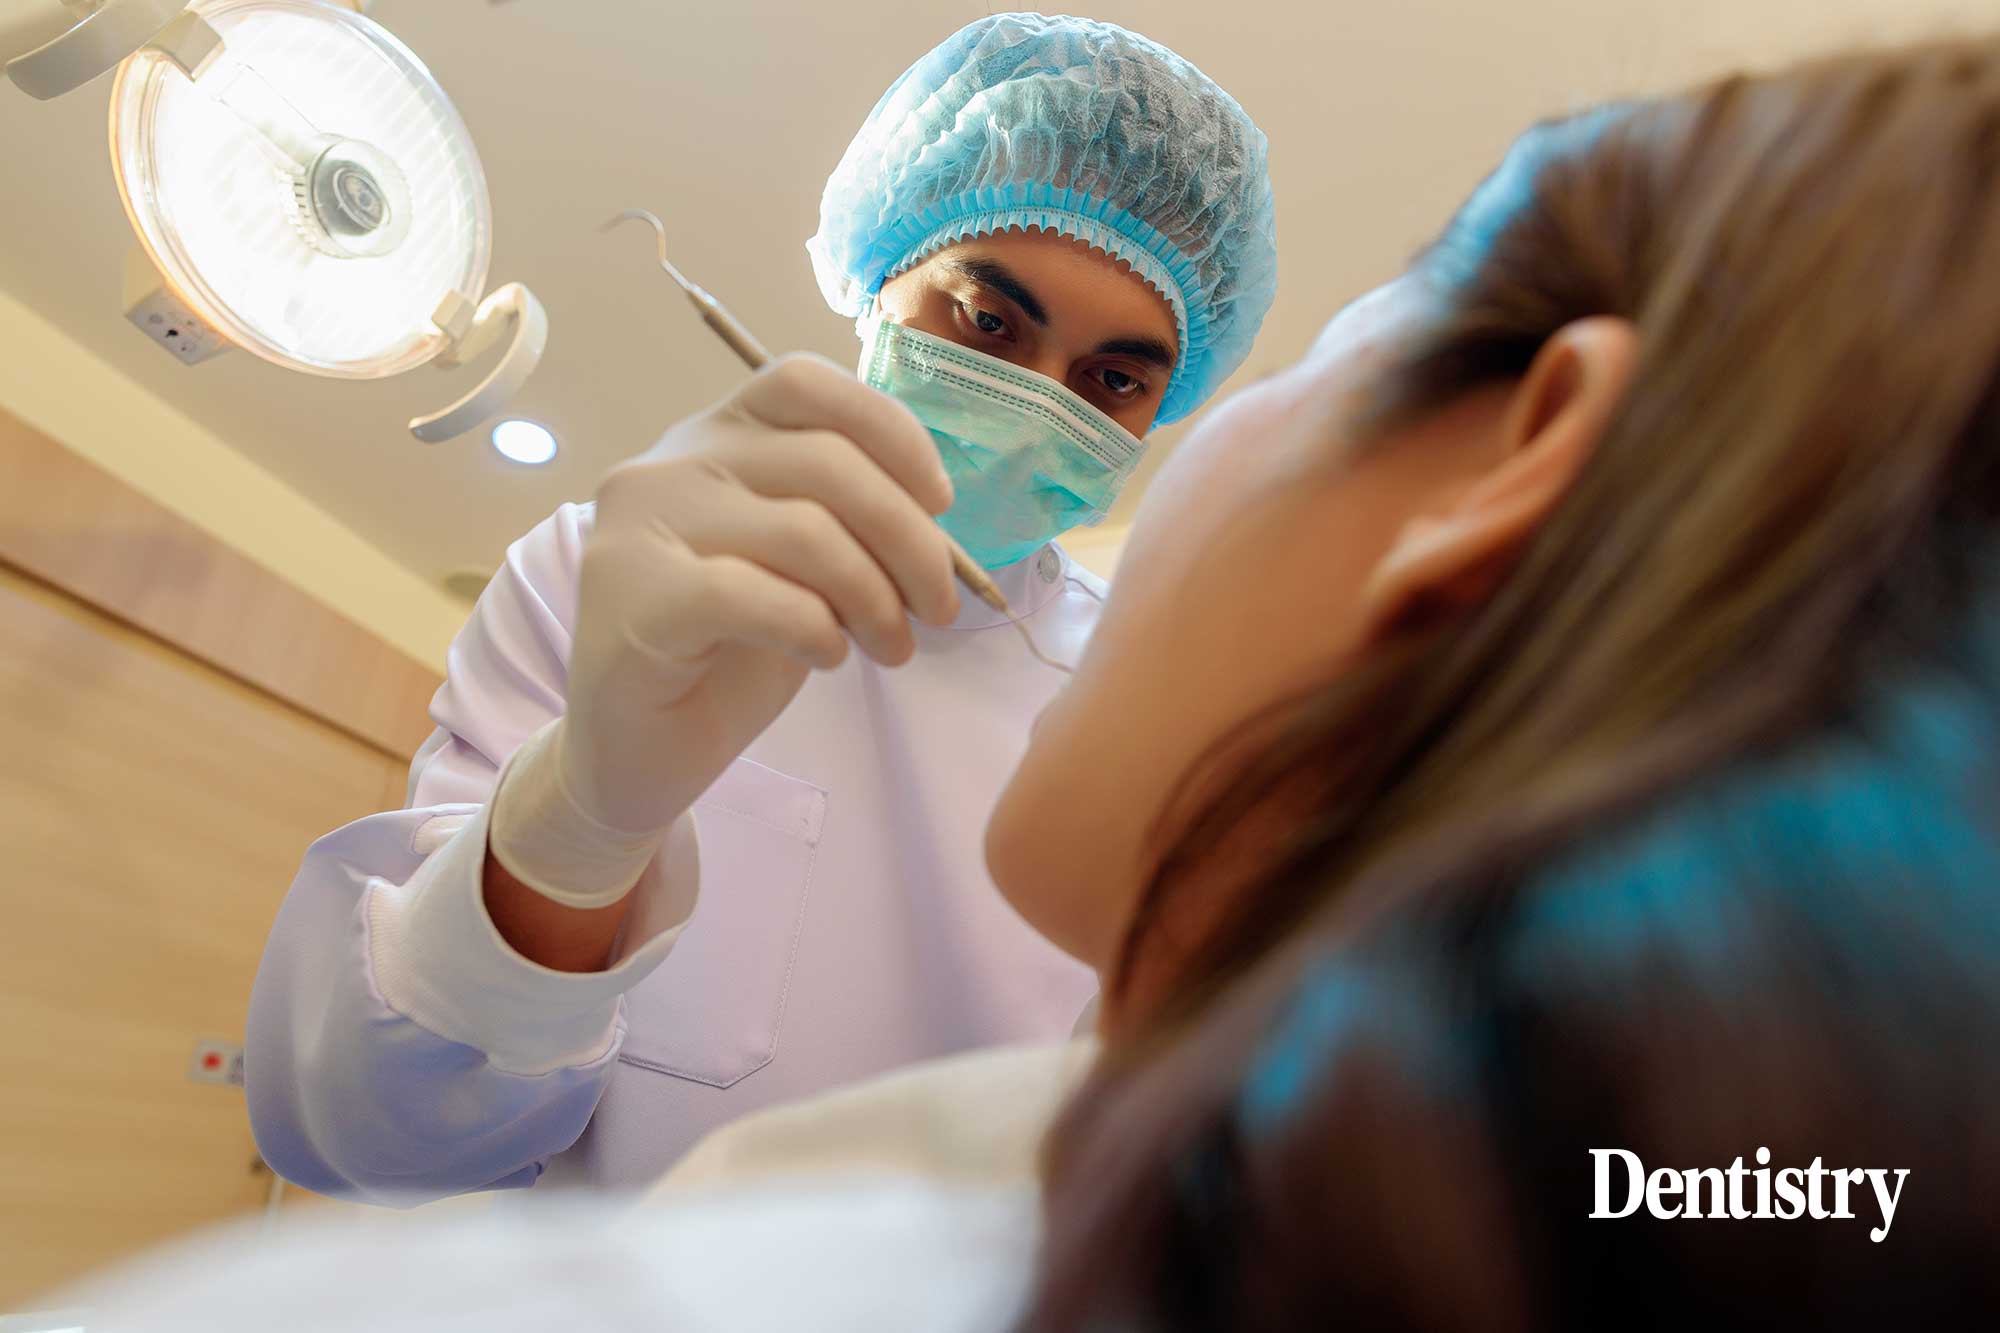 Migrant communities have unequal access to dental services